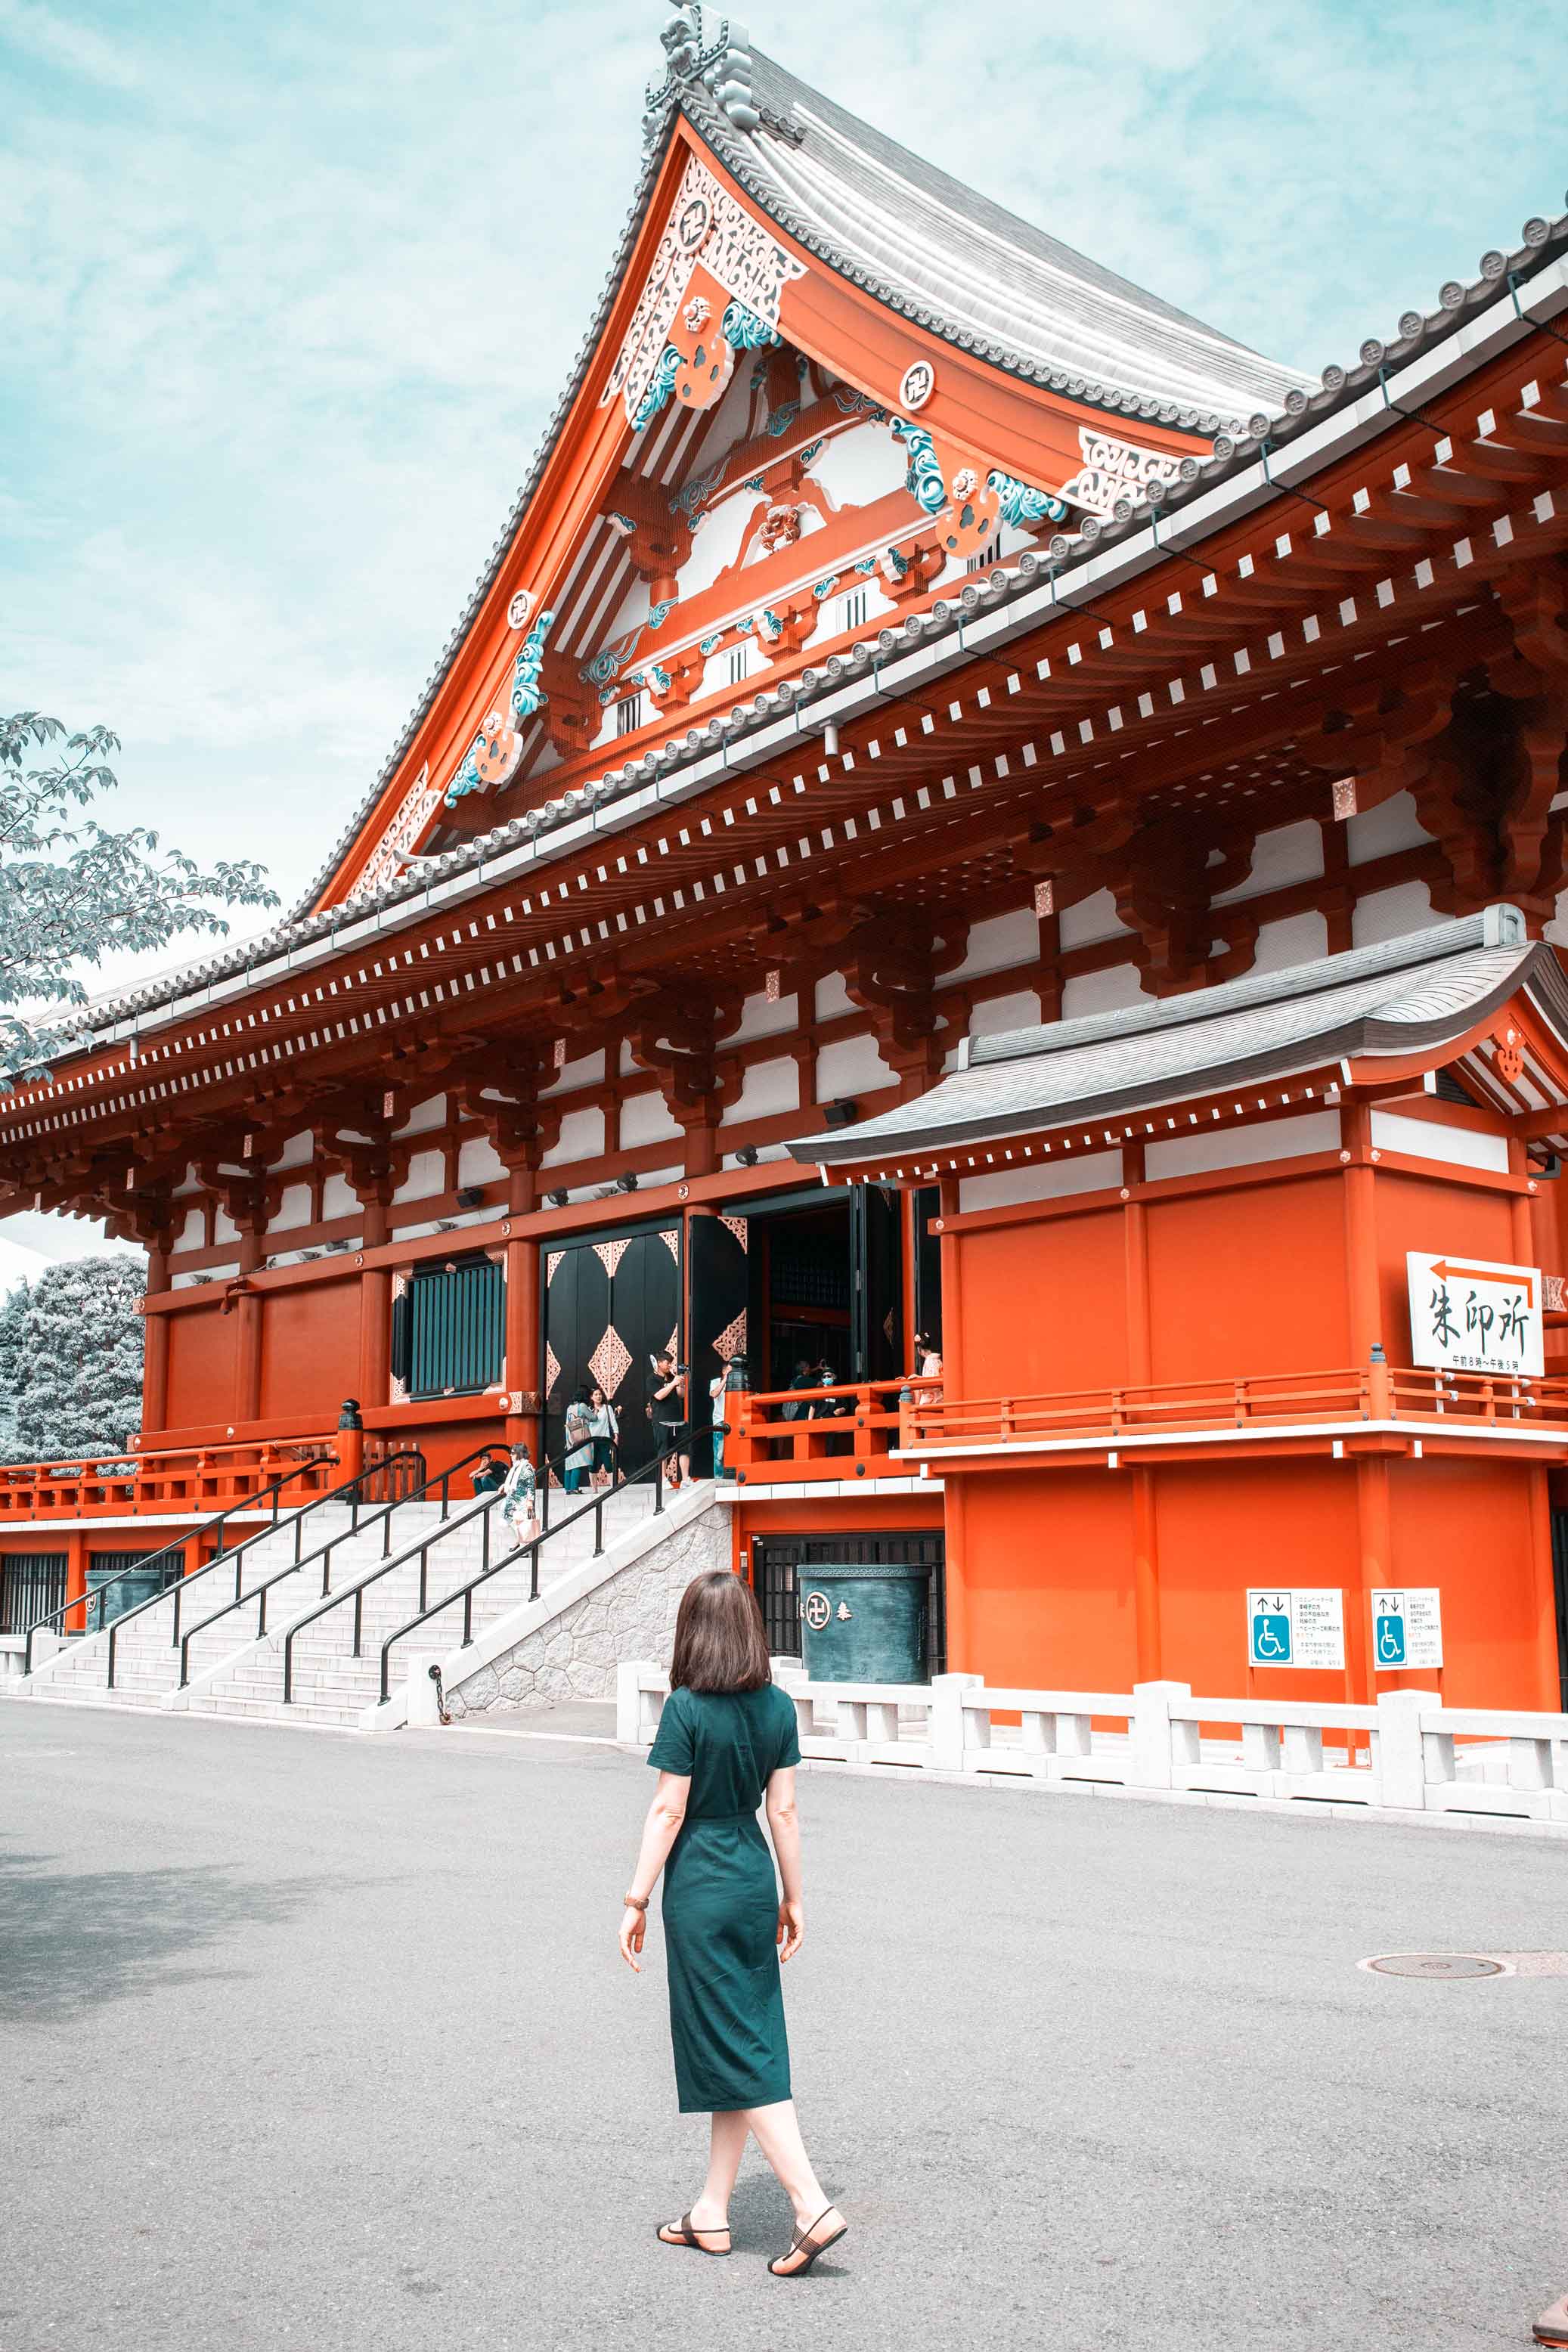 4 days in Tokyo: itineraries and best spots for photography